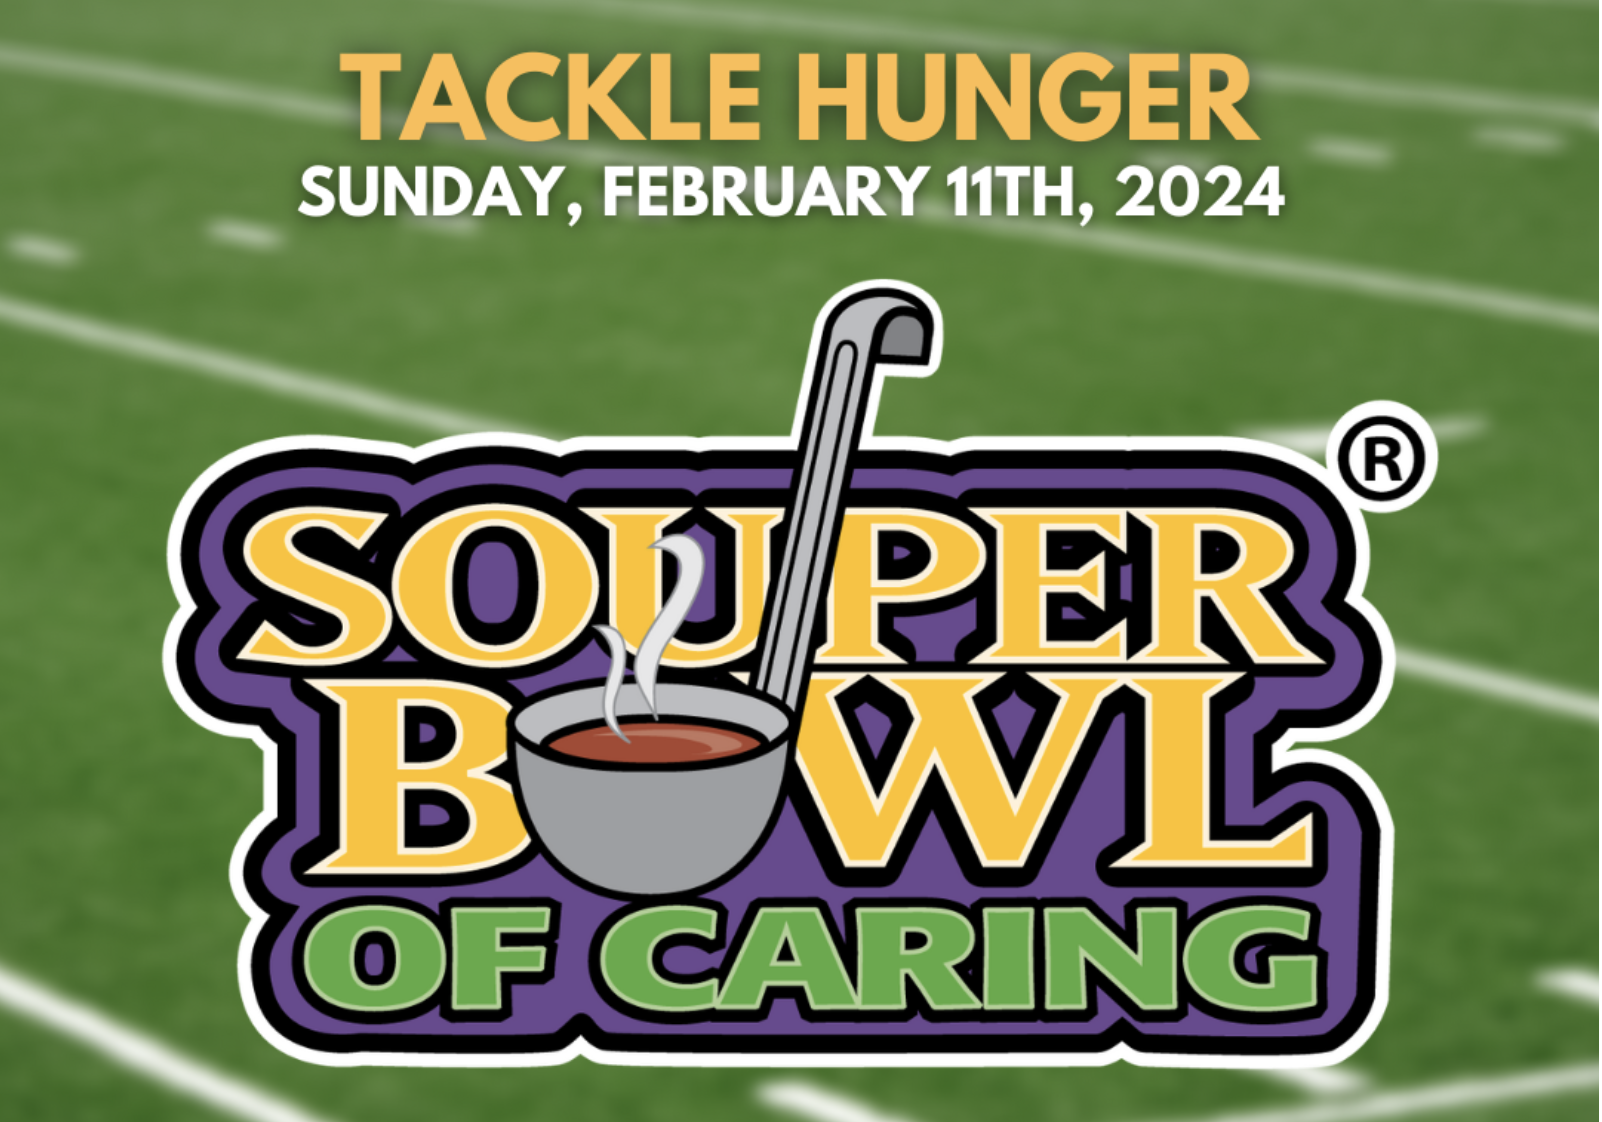 Souper Bowl of Caring: Tackle Hunger Locally with Katy Christian Ministries